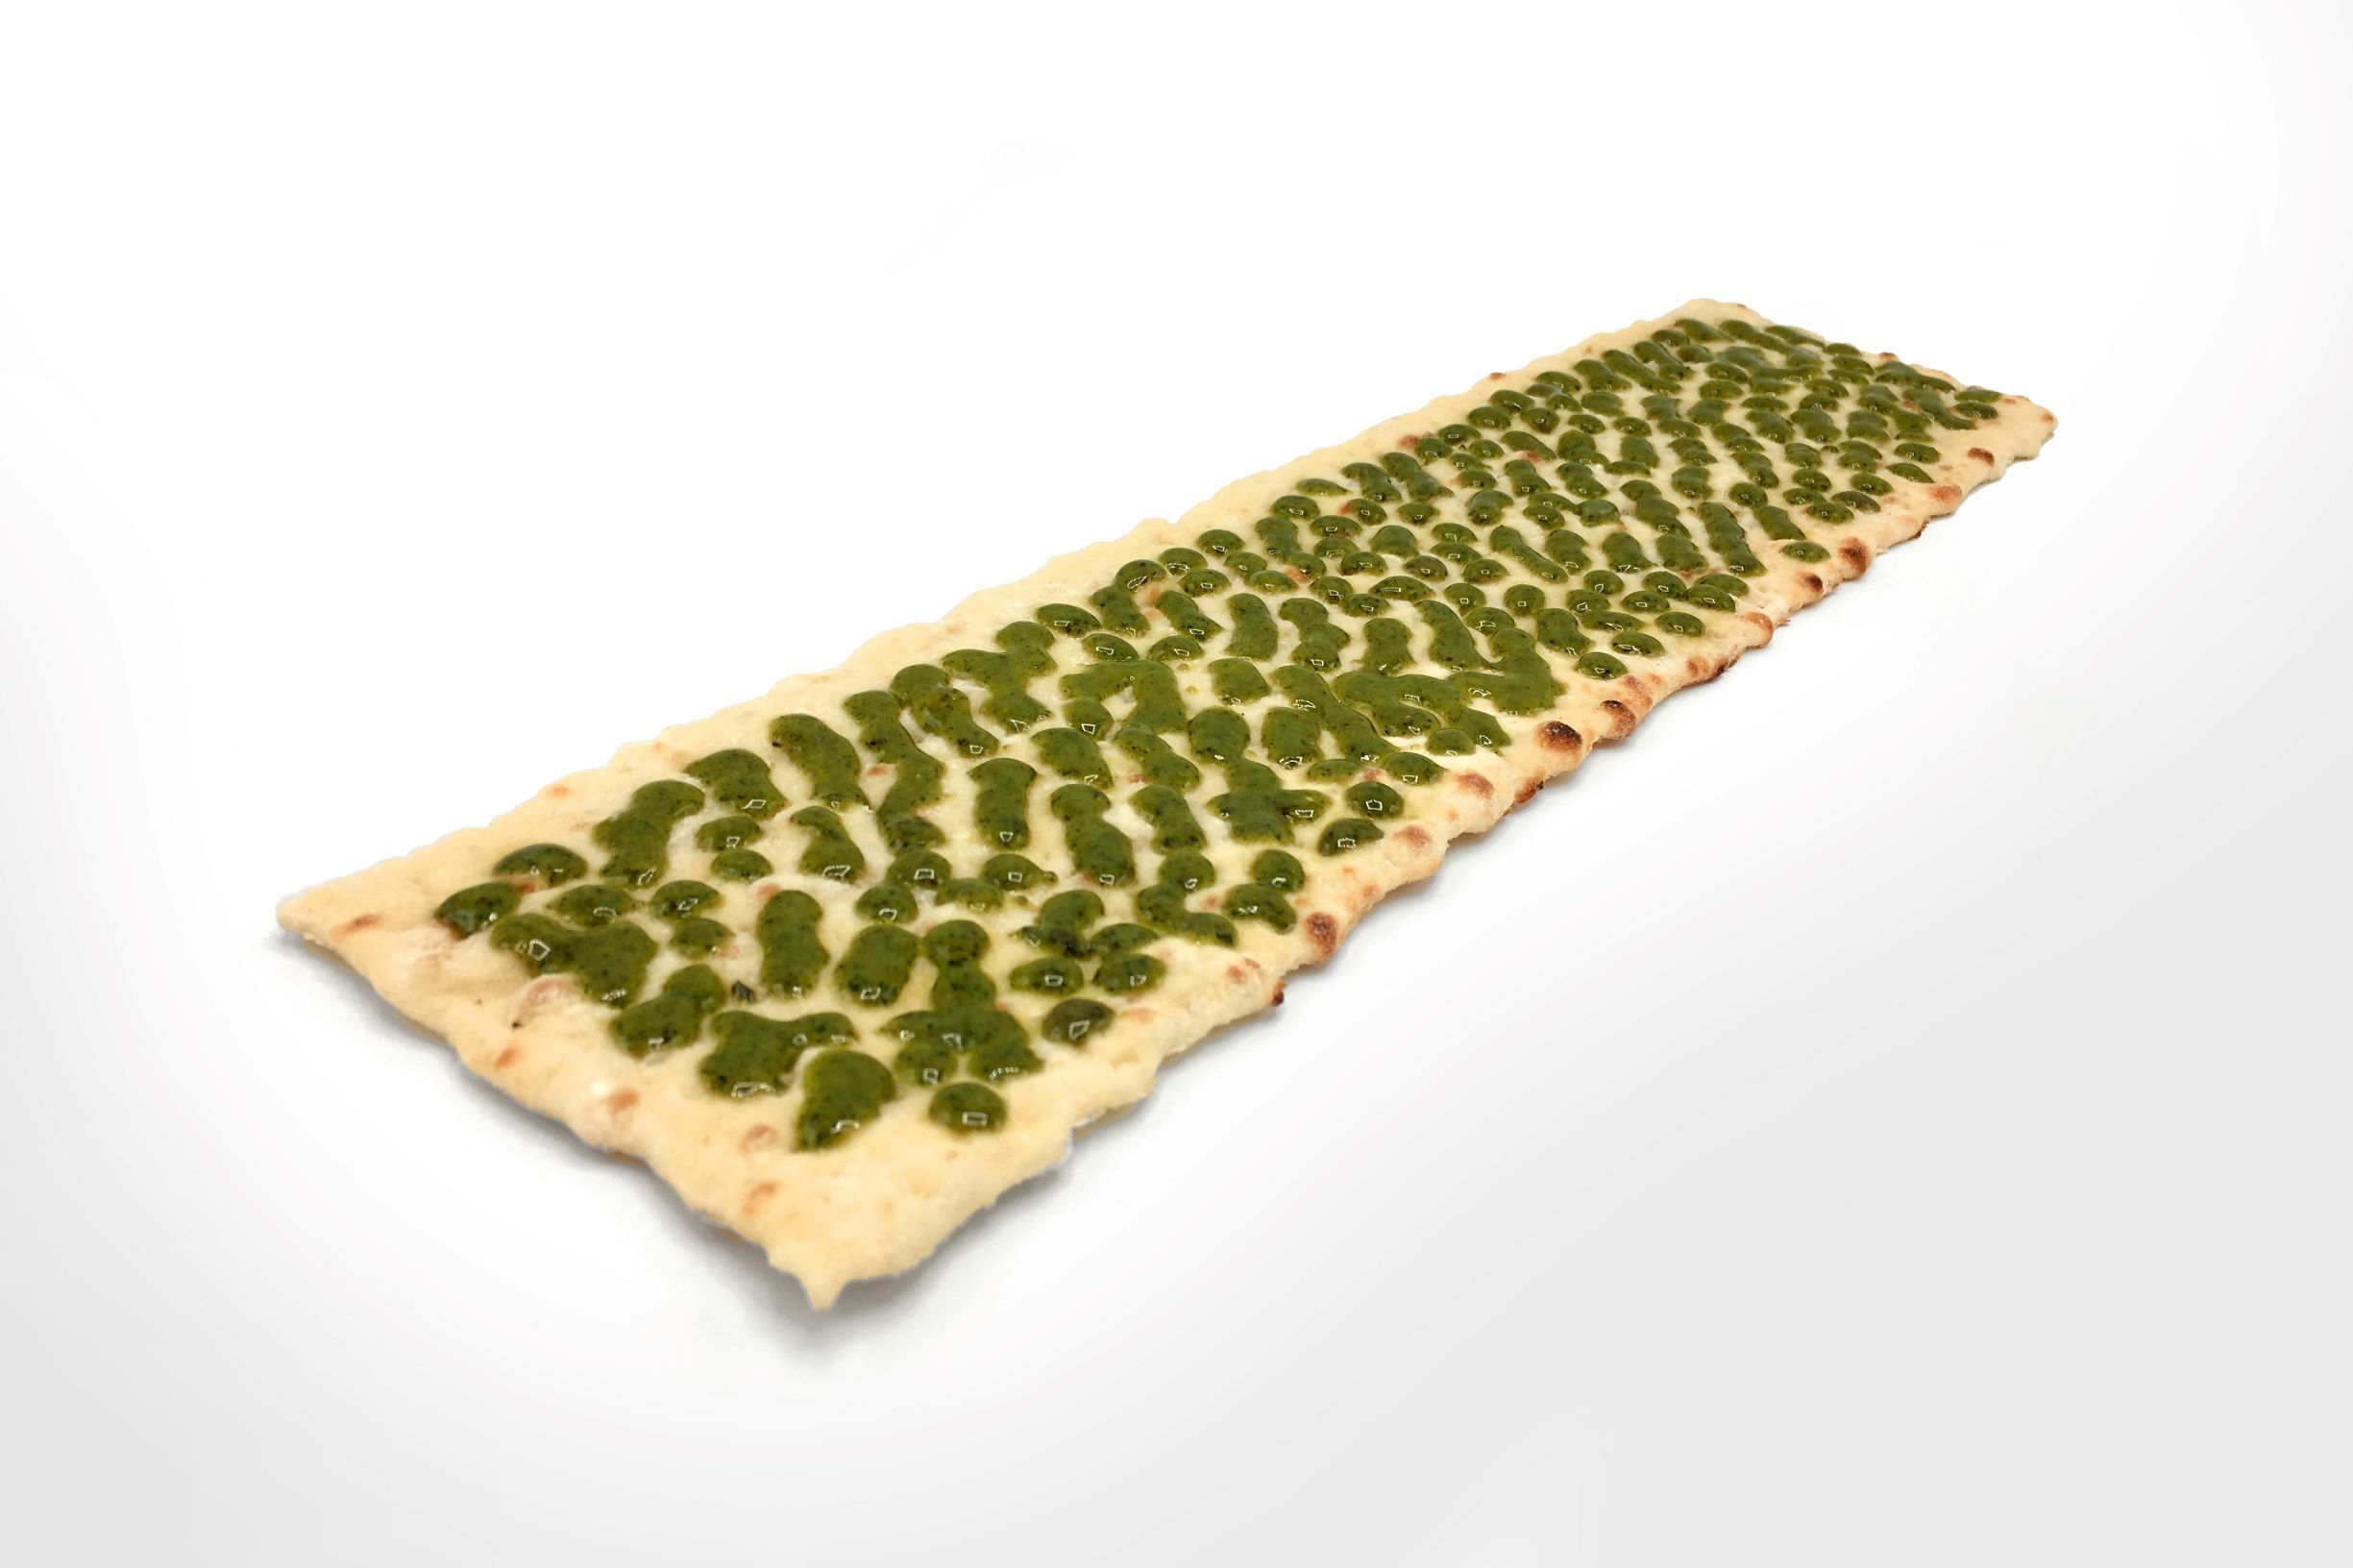 Flatbread with pesto sauce evenly applied by FoodJet sauce depositor.jpg